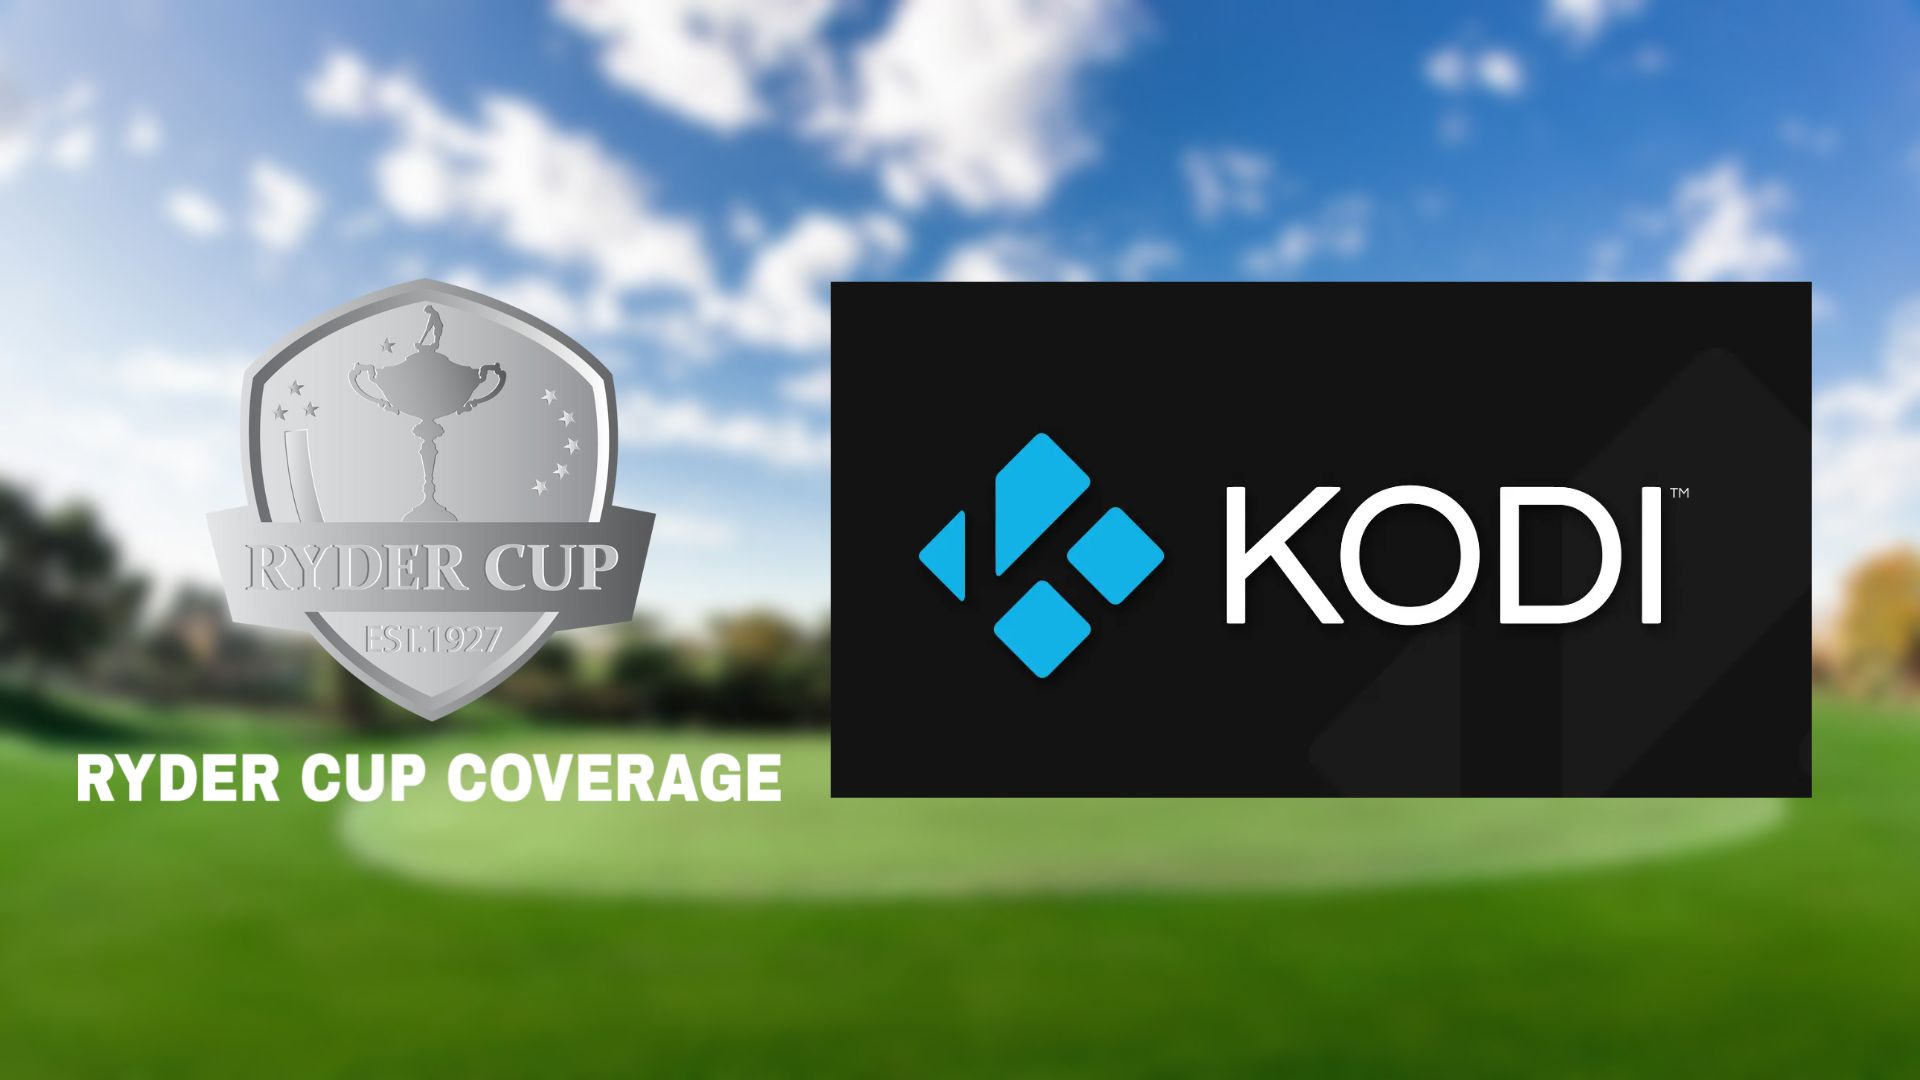 How to Watch Ryder Cup on Kodi